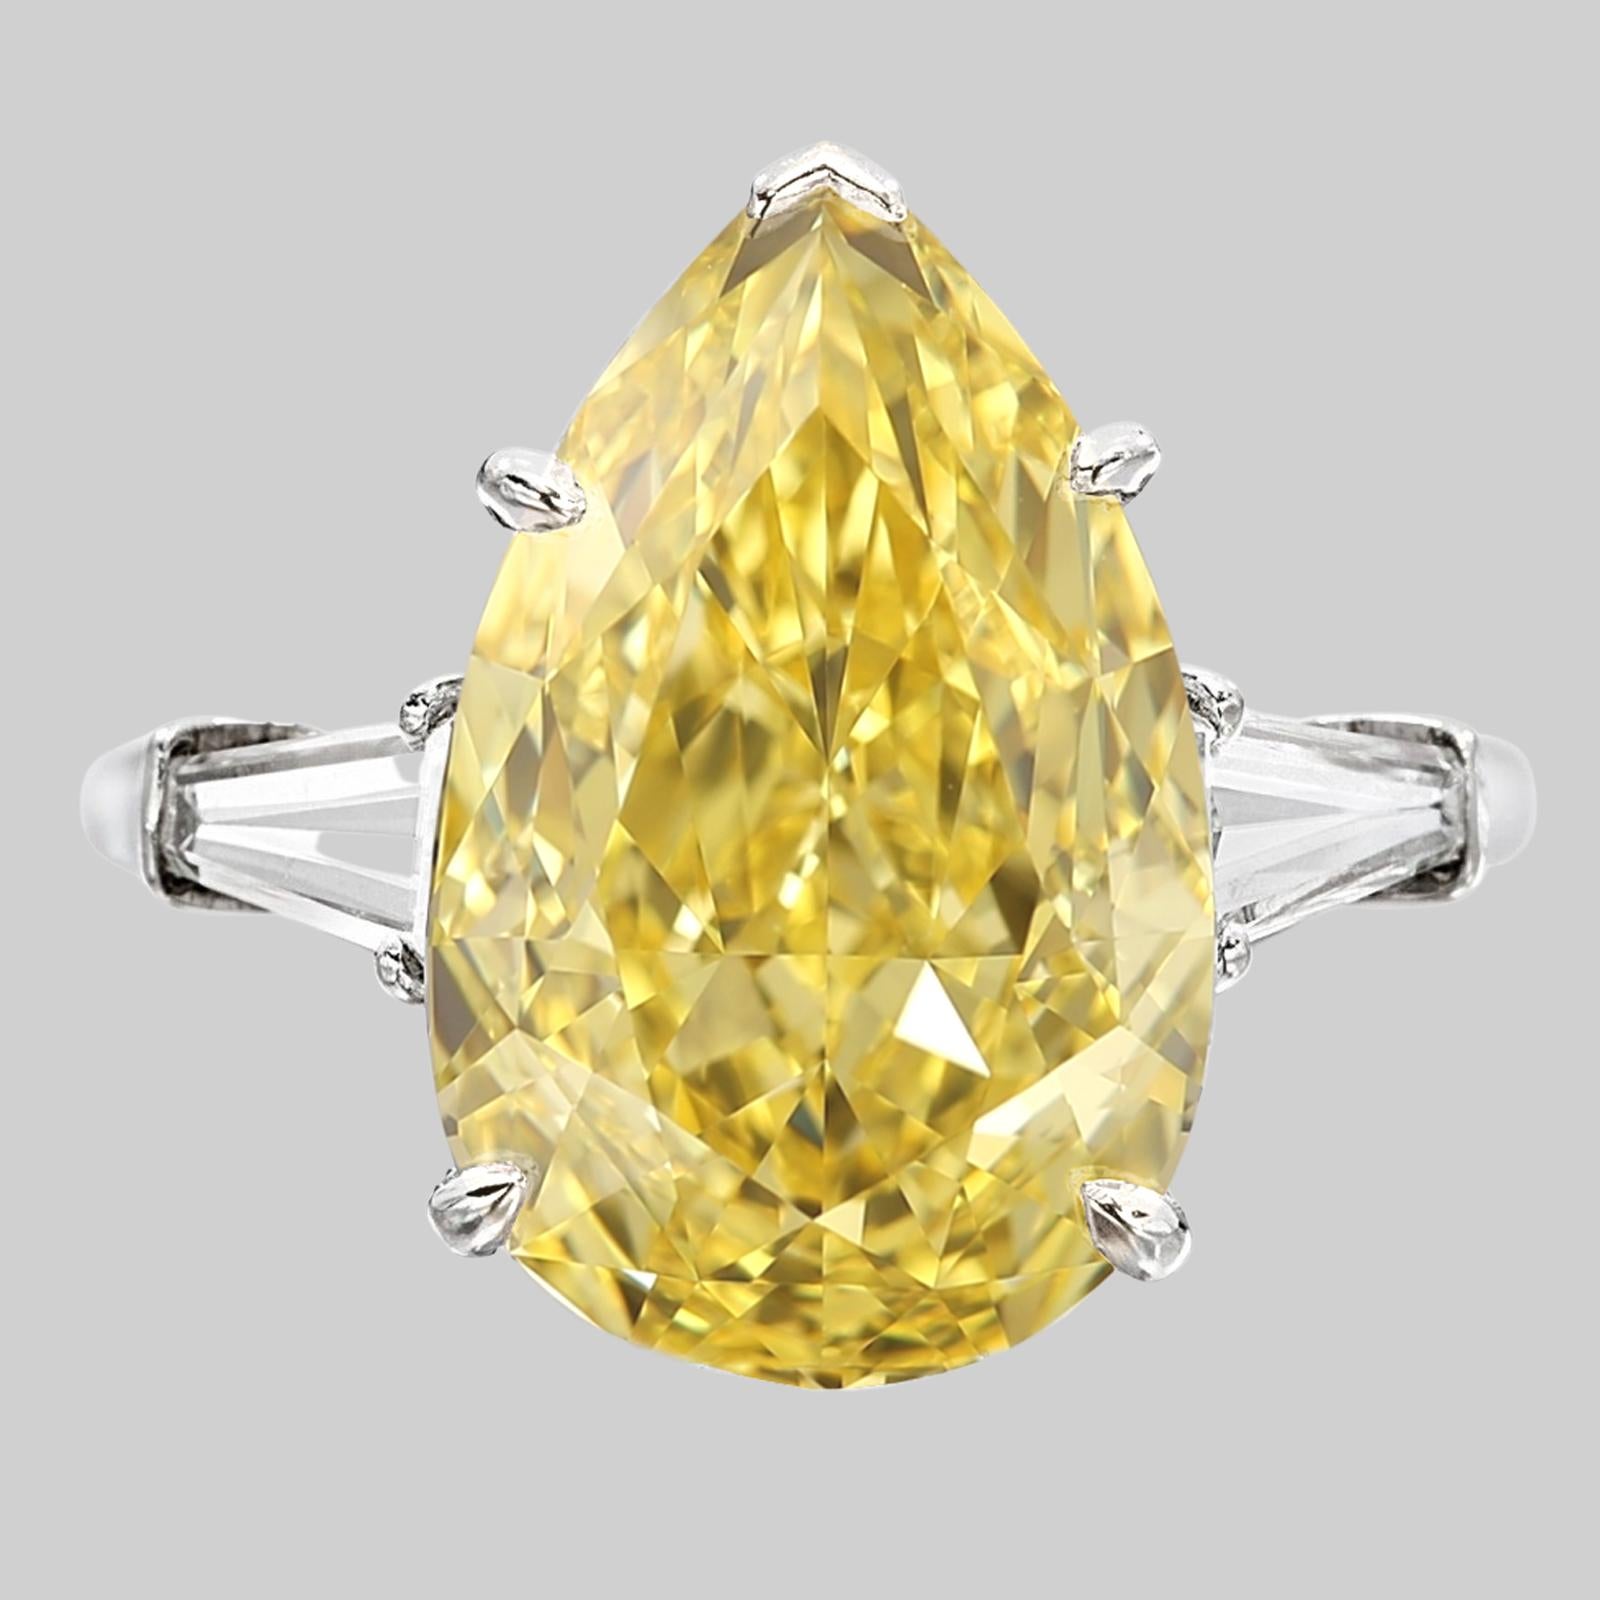 Magnificent emerald cut diamond ring  Speechless 5 Carats Fancy Yellow Pear Cut VVS in clarity. Certified by GIA set with 1 Carats of two impressive tapered diamonds set in Platinum and 18 carats Yellow Gold. 




